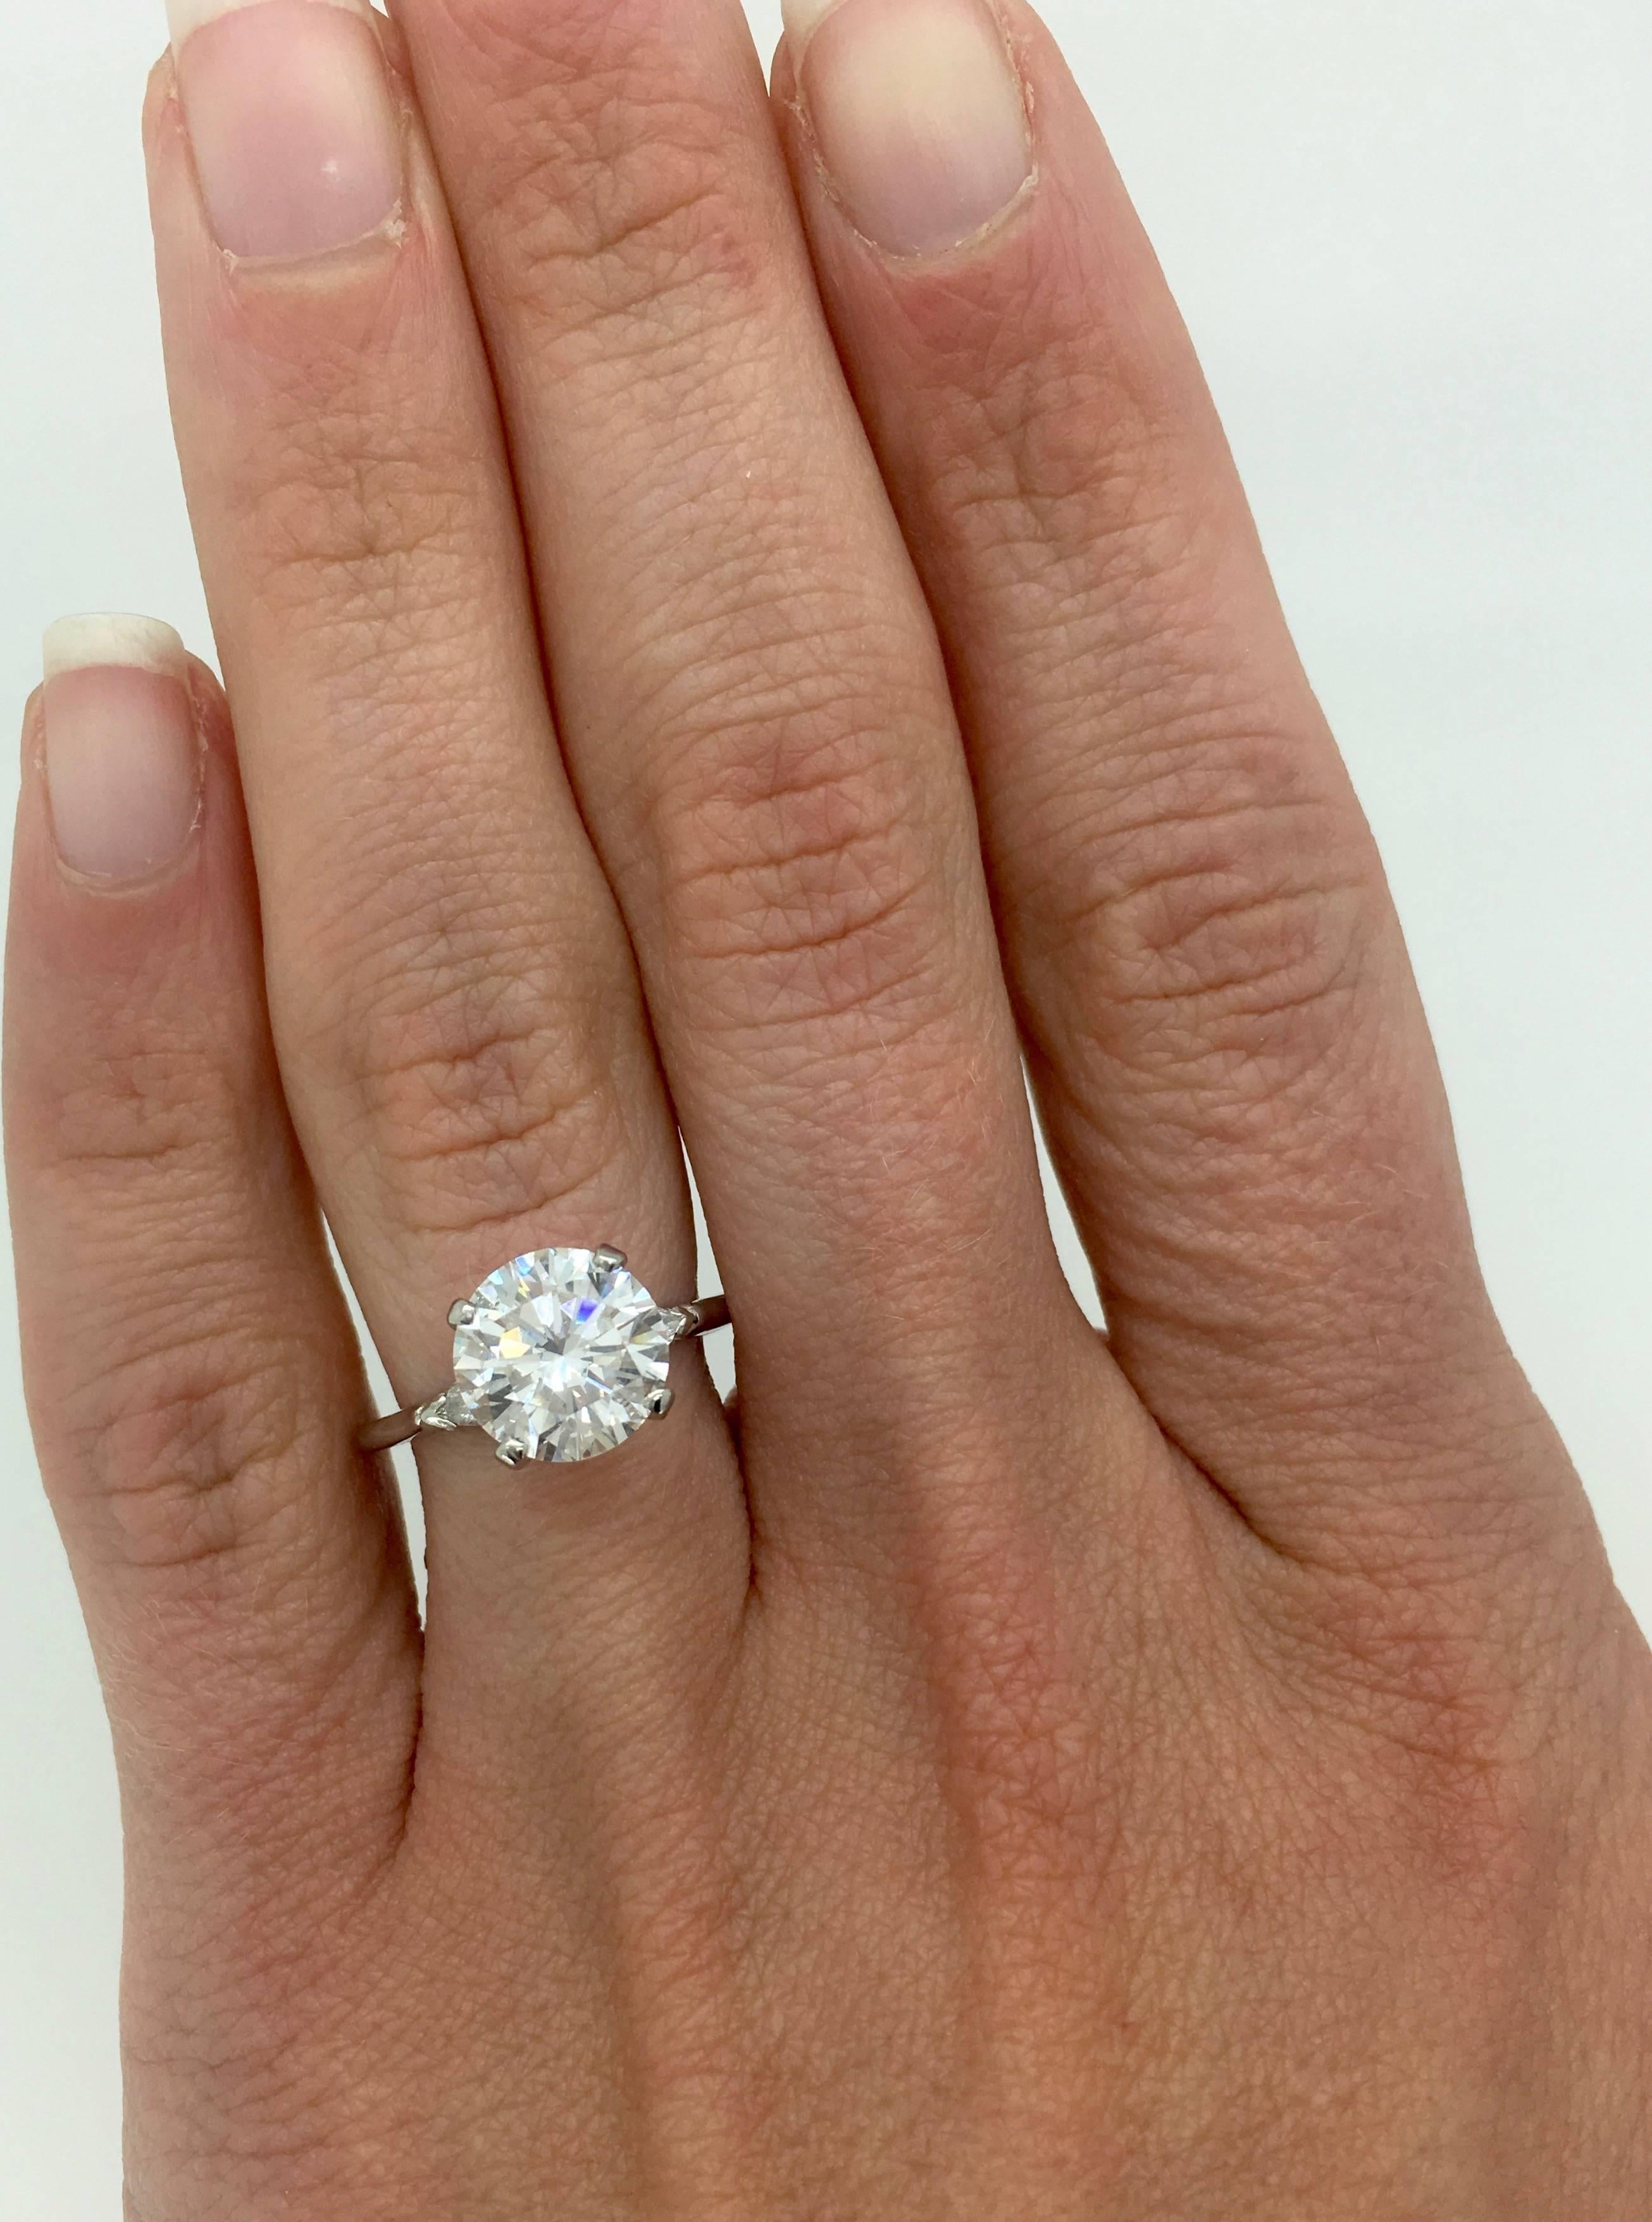 This platinum engagement ring features a 2.43CT Round Brilliant Cut Diamond displaying J-K color and SI1 clarity. Two Pear Cut Diamonds accent the featured diamond. There is approximately 2.67CTW of diamonds in this ring. Currently the beautiful